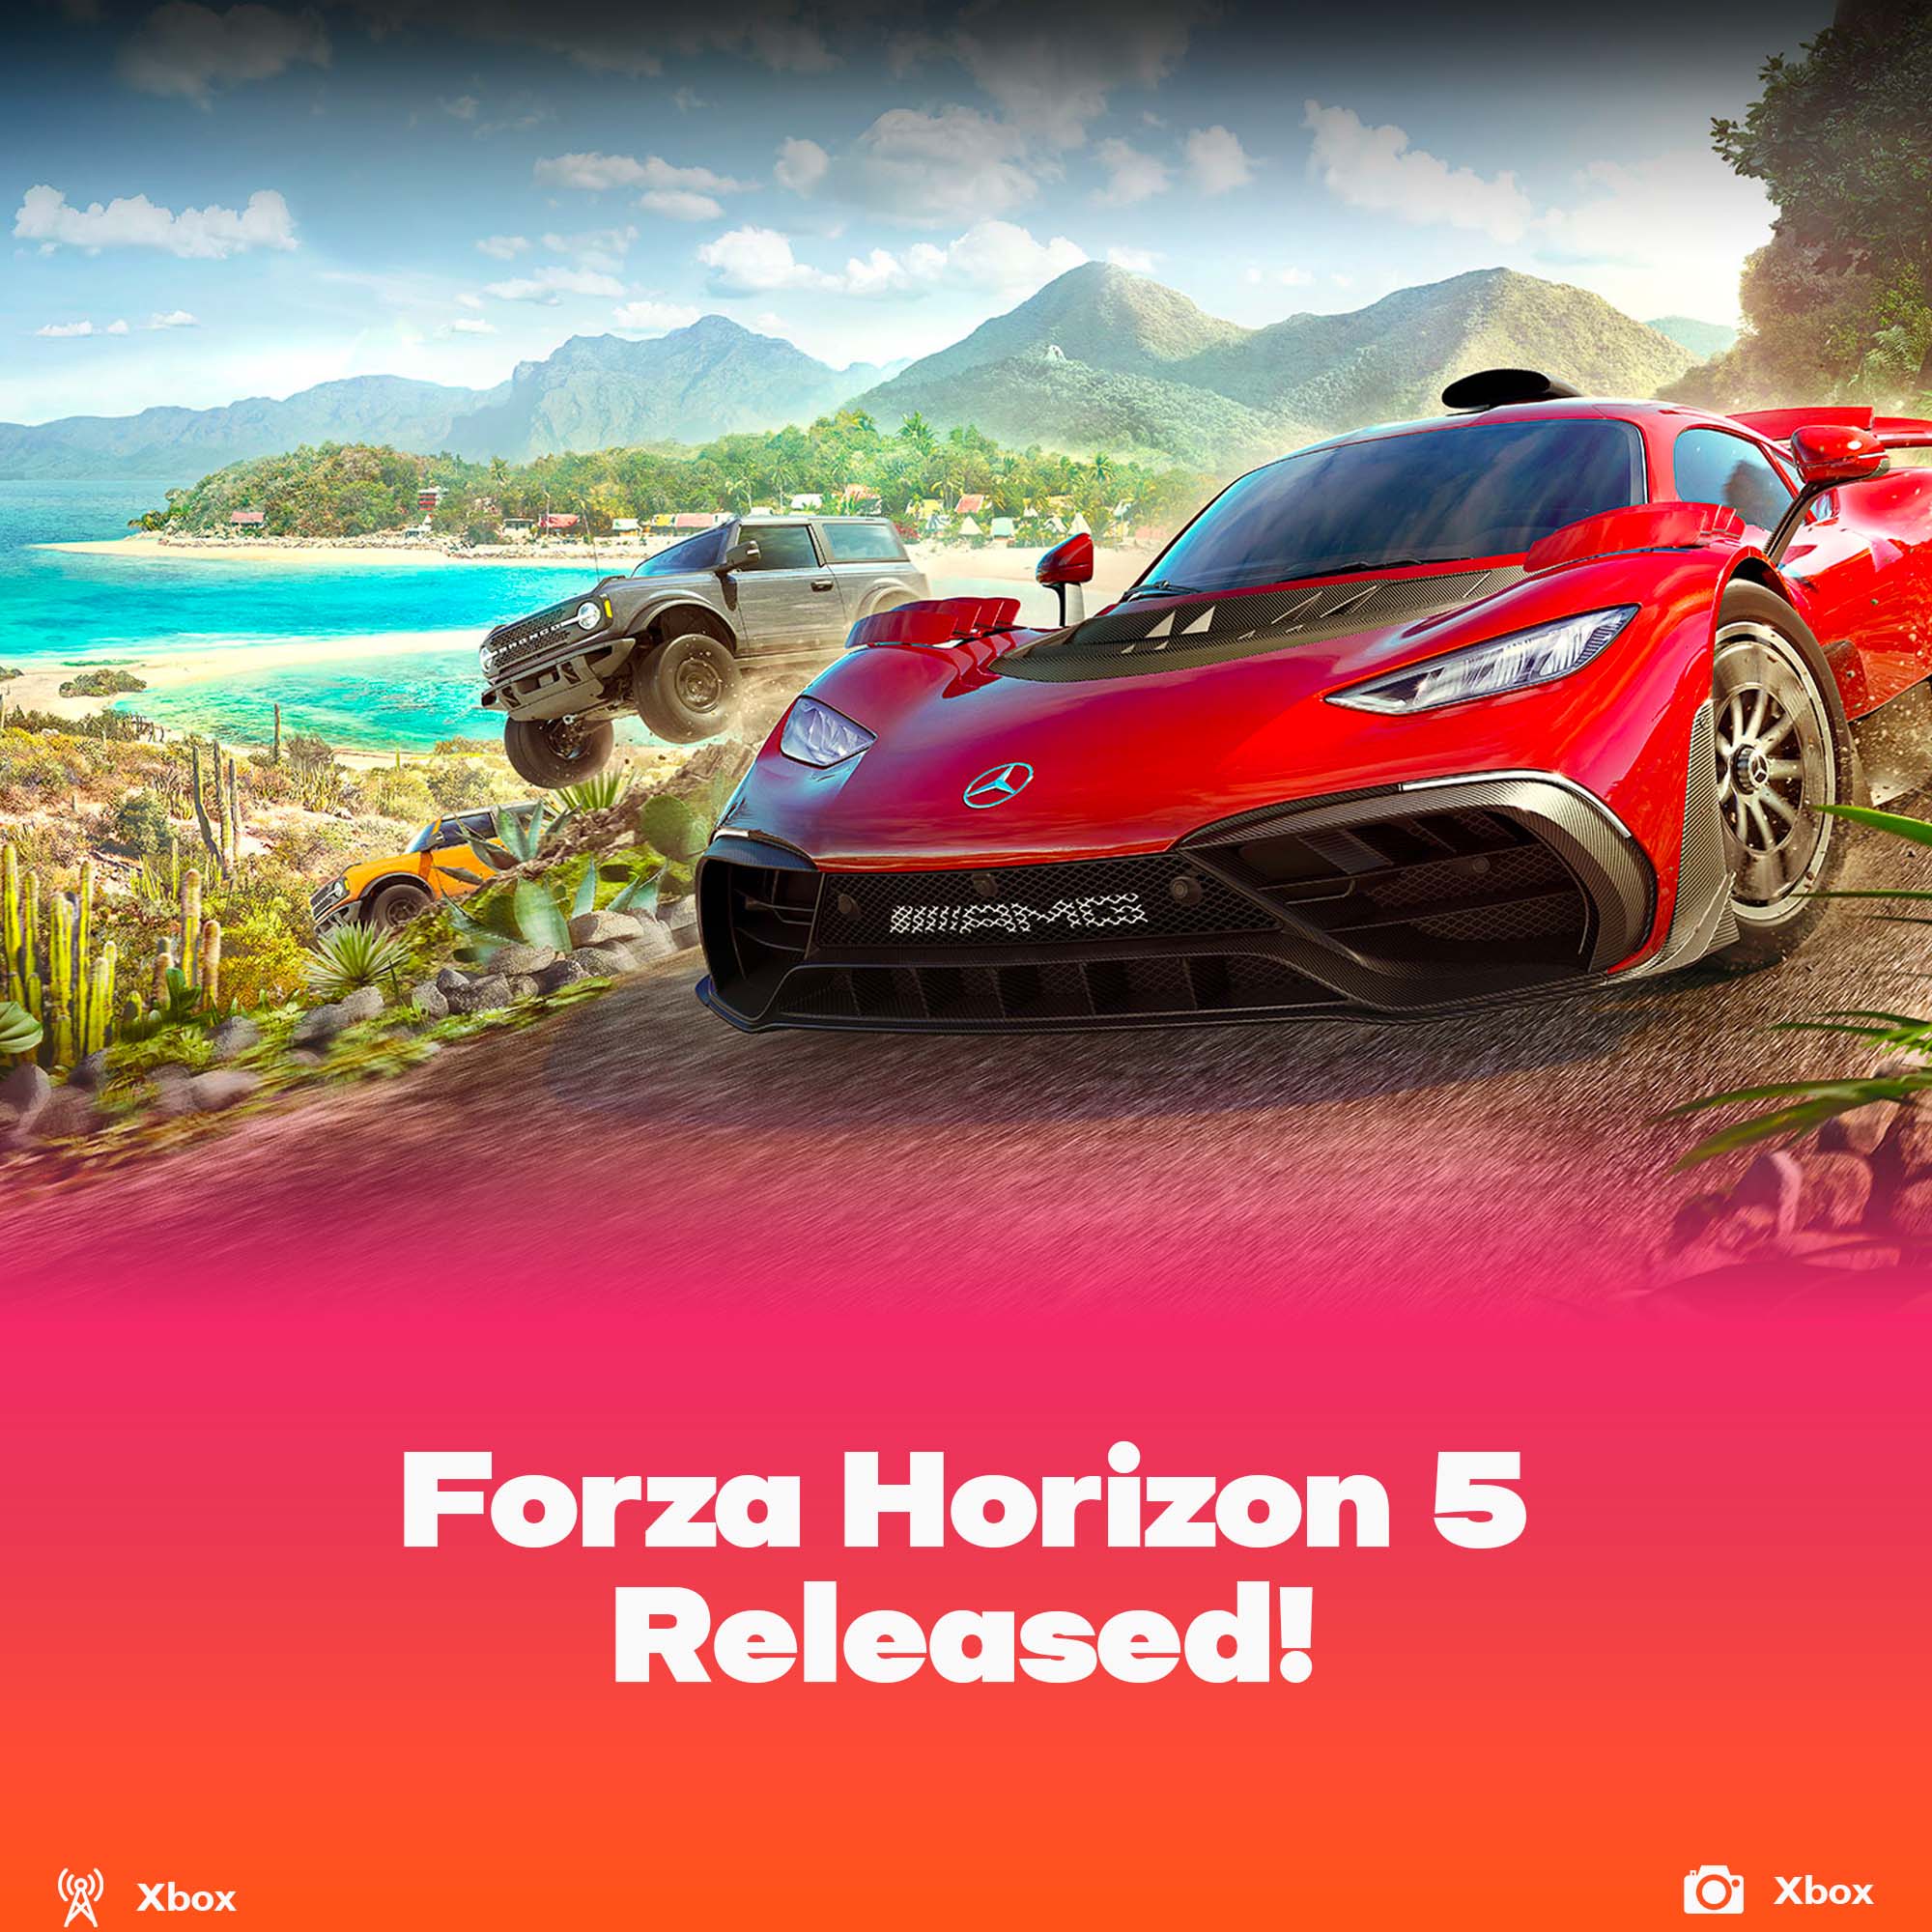 Microsoft released Forza Horizon 5 on Xbox and PC